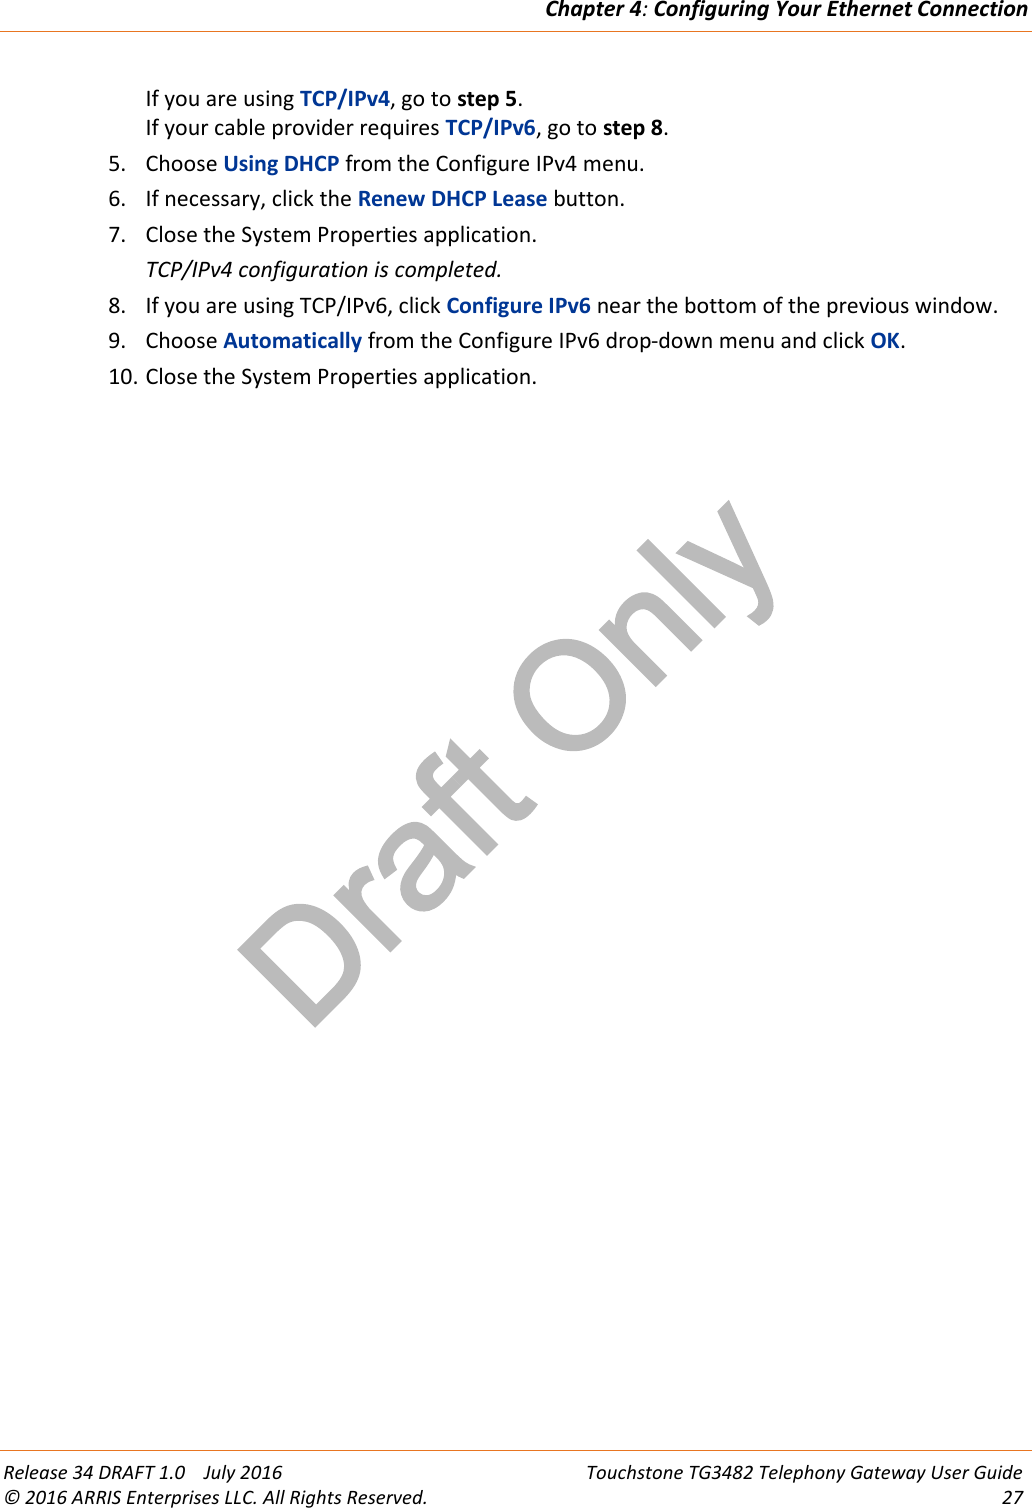 Draft OnlyChapter 4:Configuring Your Ethernet ConnectionRelease 34 DRAFT 1.0 July 2016 Touchstone TG3482 Telephony Gateway User Guide© 2016 ARRIS Enterprises LLC. All Rights Reserved. 27If you are using TCP/IPv4, go to step 5.If your cable provider requires TCP/IPv6, go to step 8.5. Choose Using DHCP from the Configure IPv4 menu.6. If necessary, click the Renew DHCP Lease button.7. Close the System Properties application.TCP/IPv4 configuration is completed.8. If you are using TCP/IPv6, click Configure IPv6 near the bottom of the previous window.9. Choose Automatically from the Configure IPv6 drop-down menu and click OK.10. Close the System Properties application.